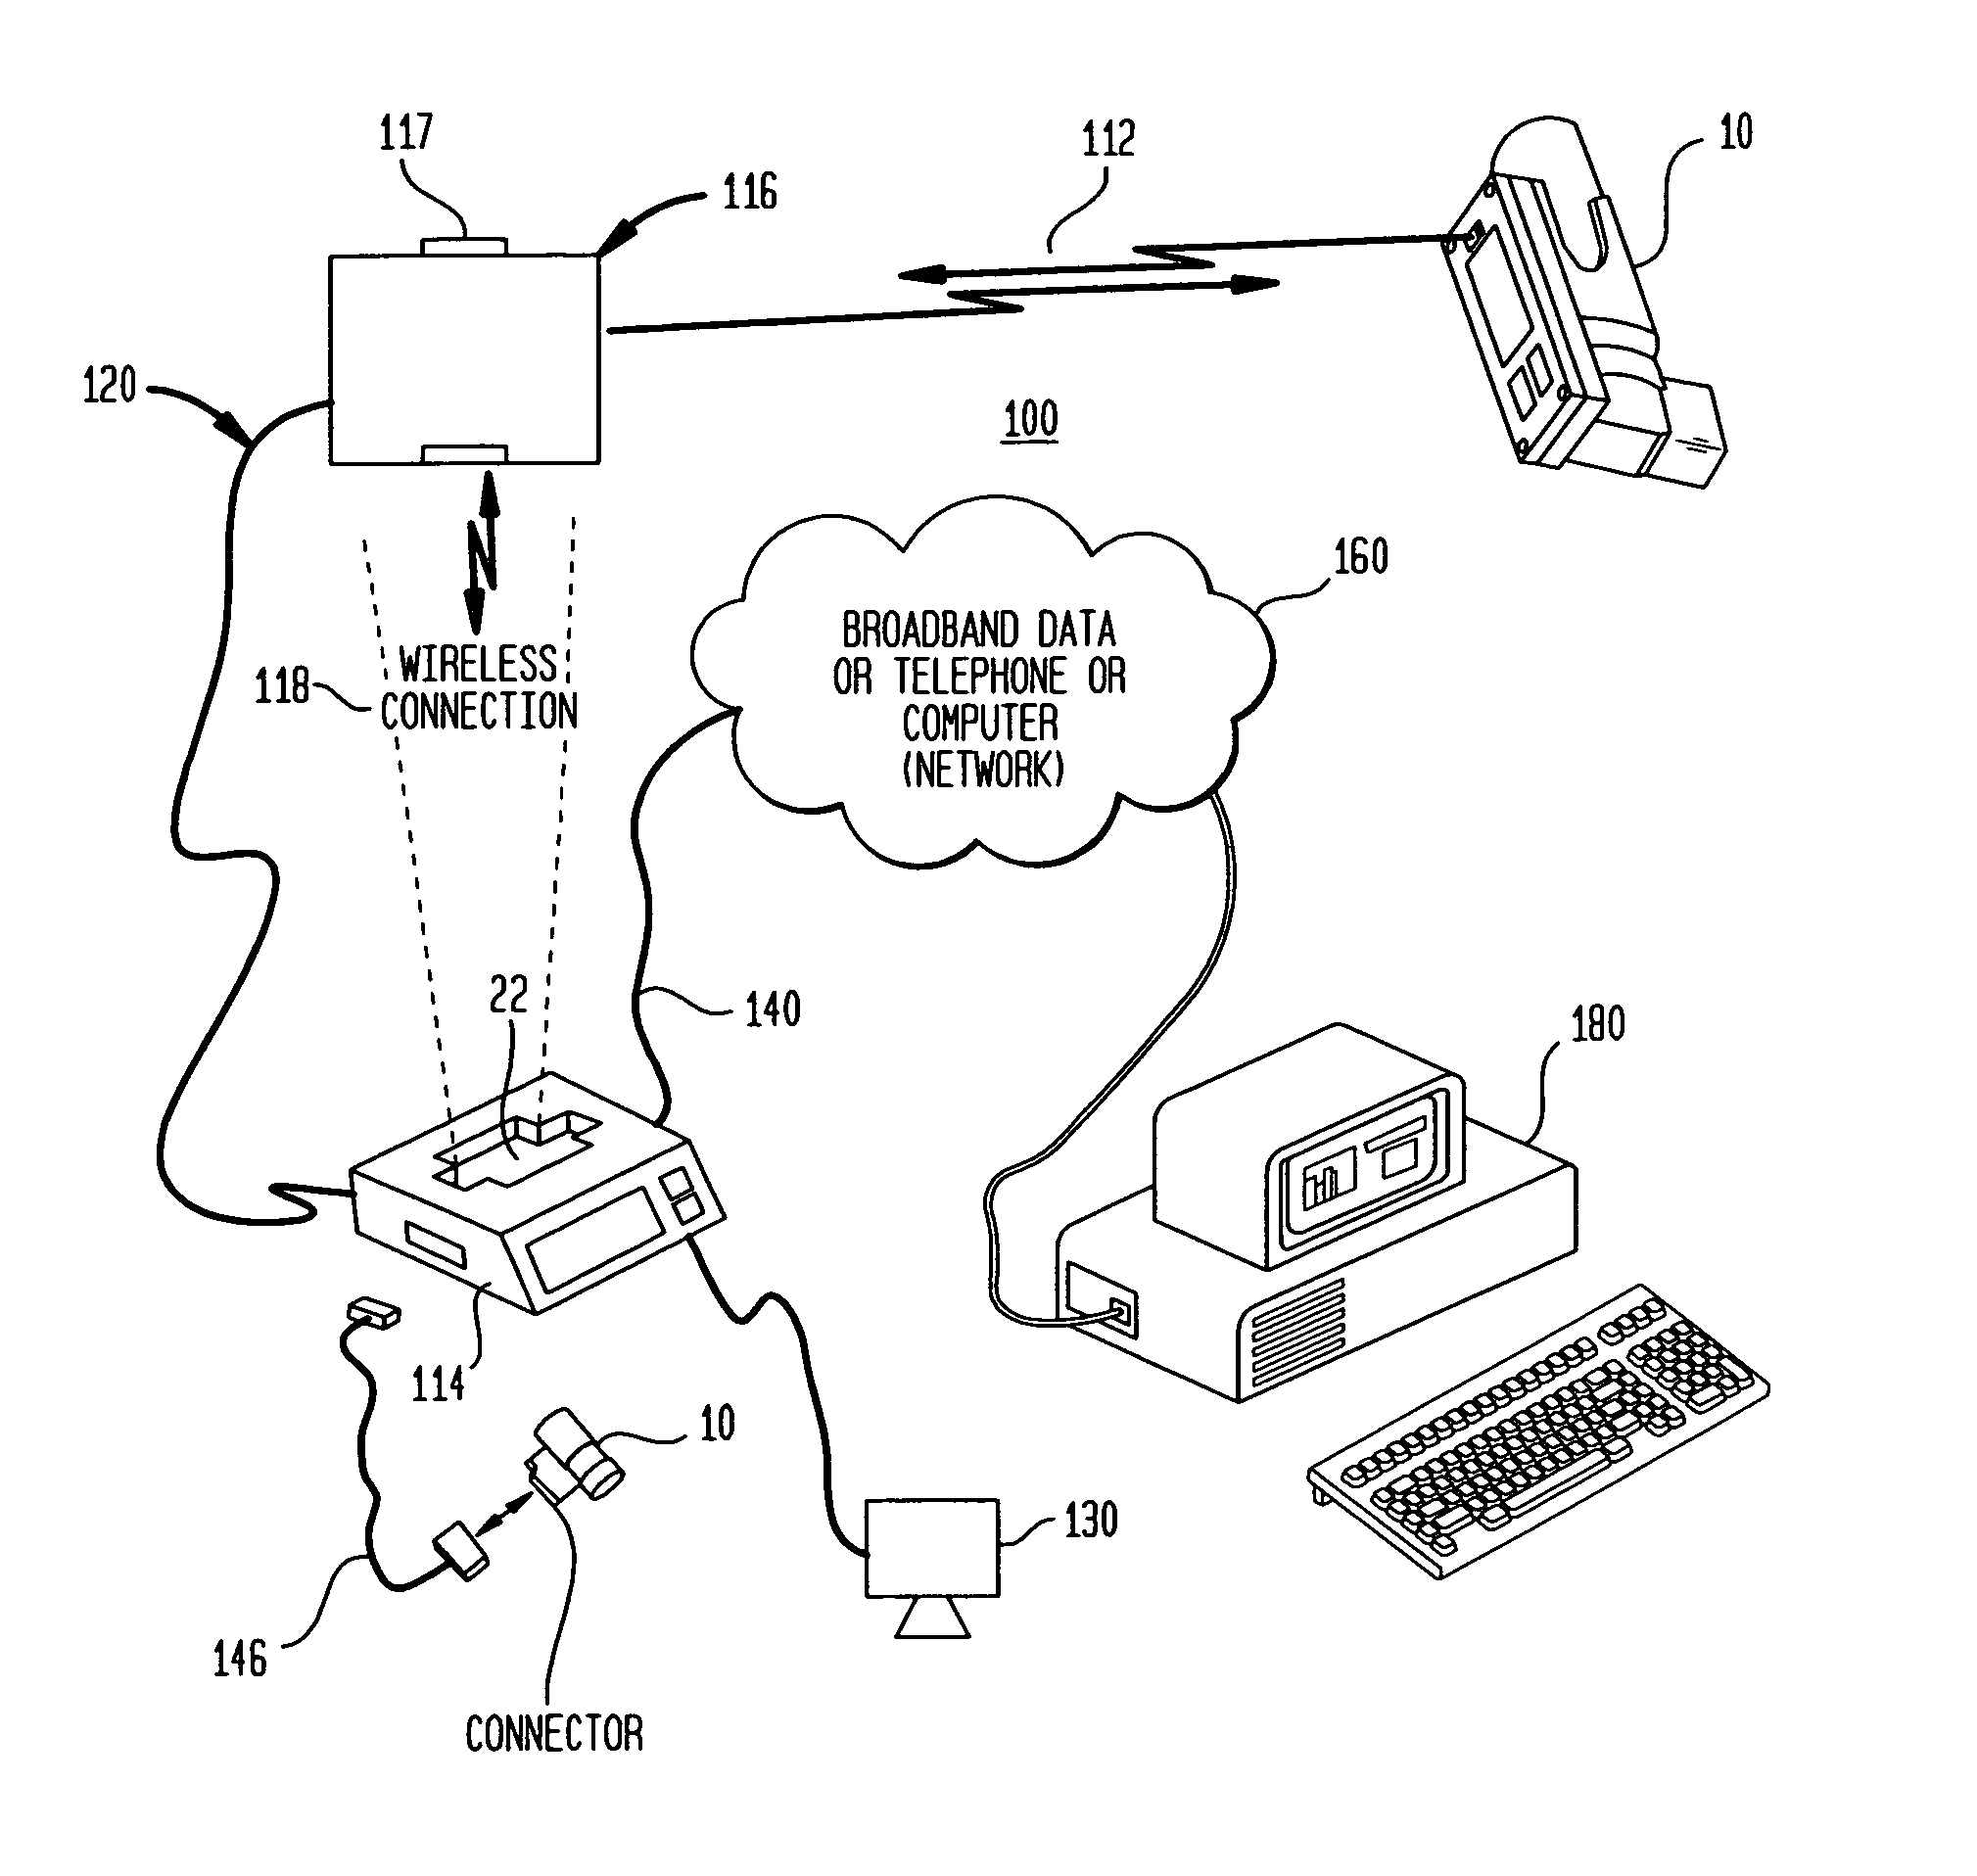 Apparatus method and for intelligent electronic medical devices